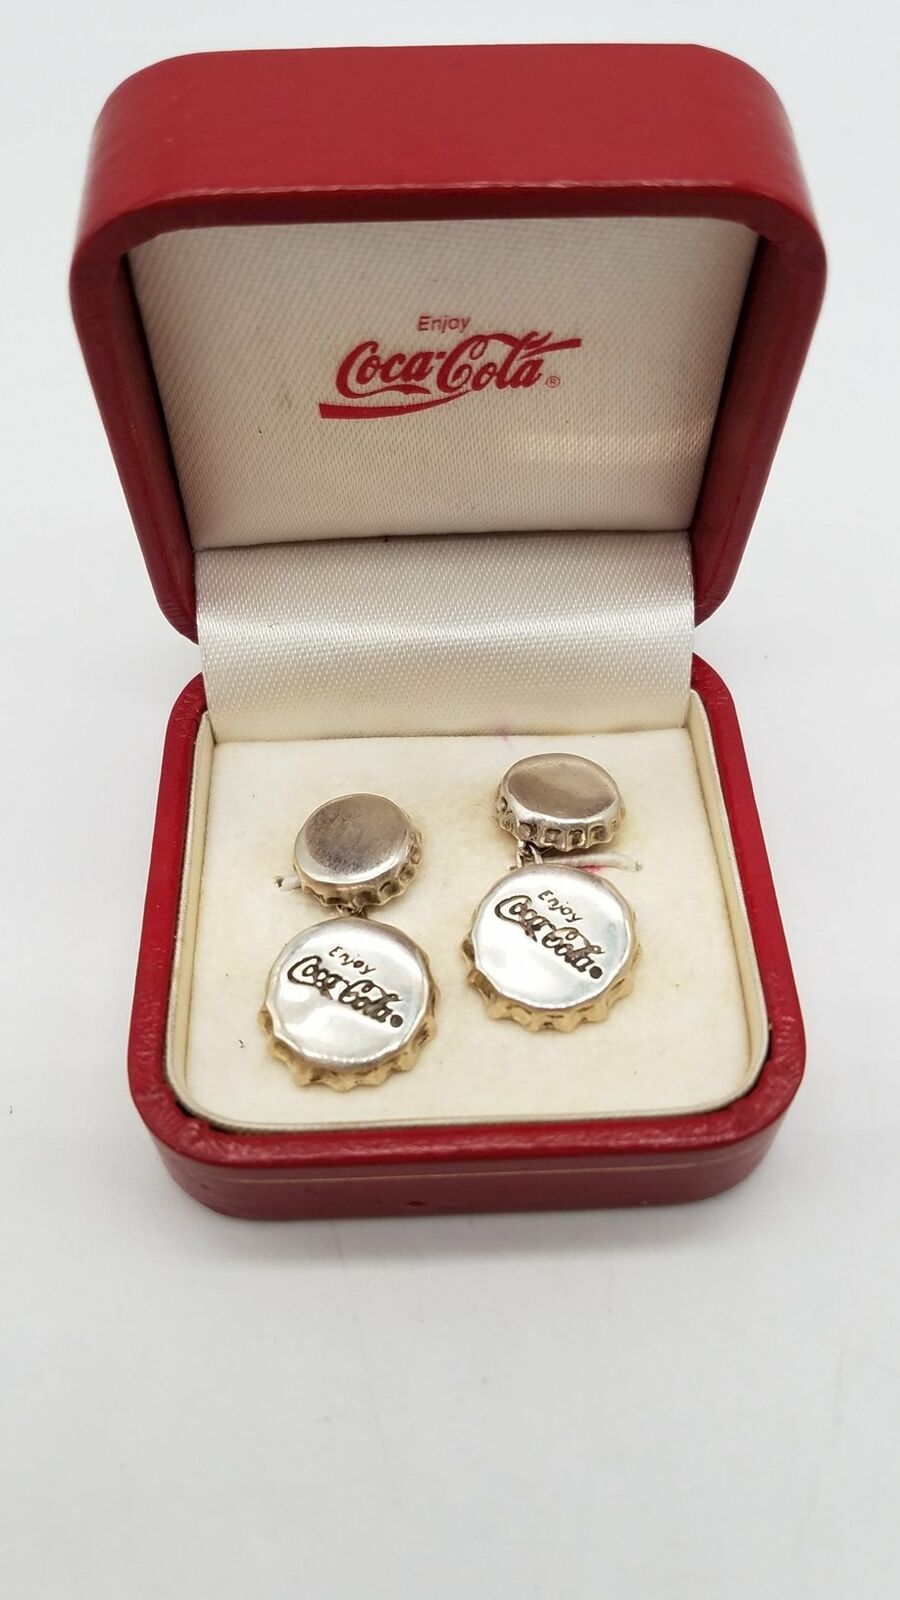 Set of Brand new 925 Sterling Silver 'Enjoy Cufflinks Coca-Cola' Box New product type w LB8